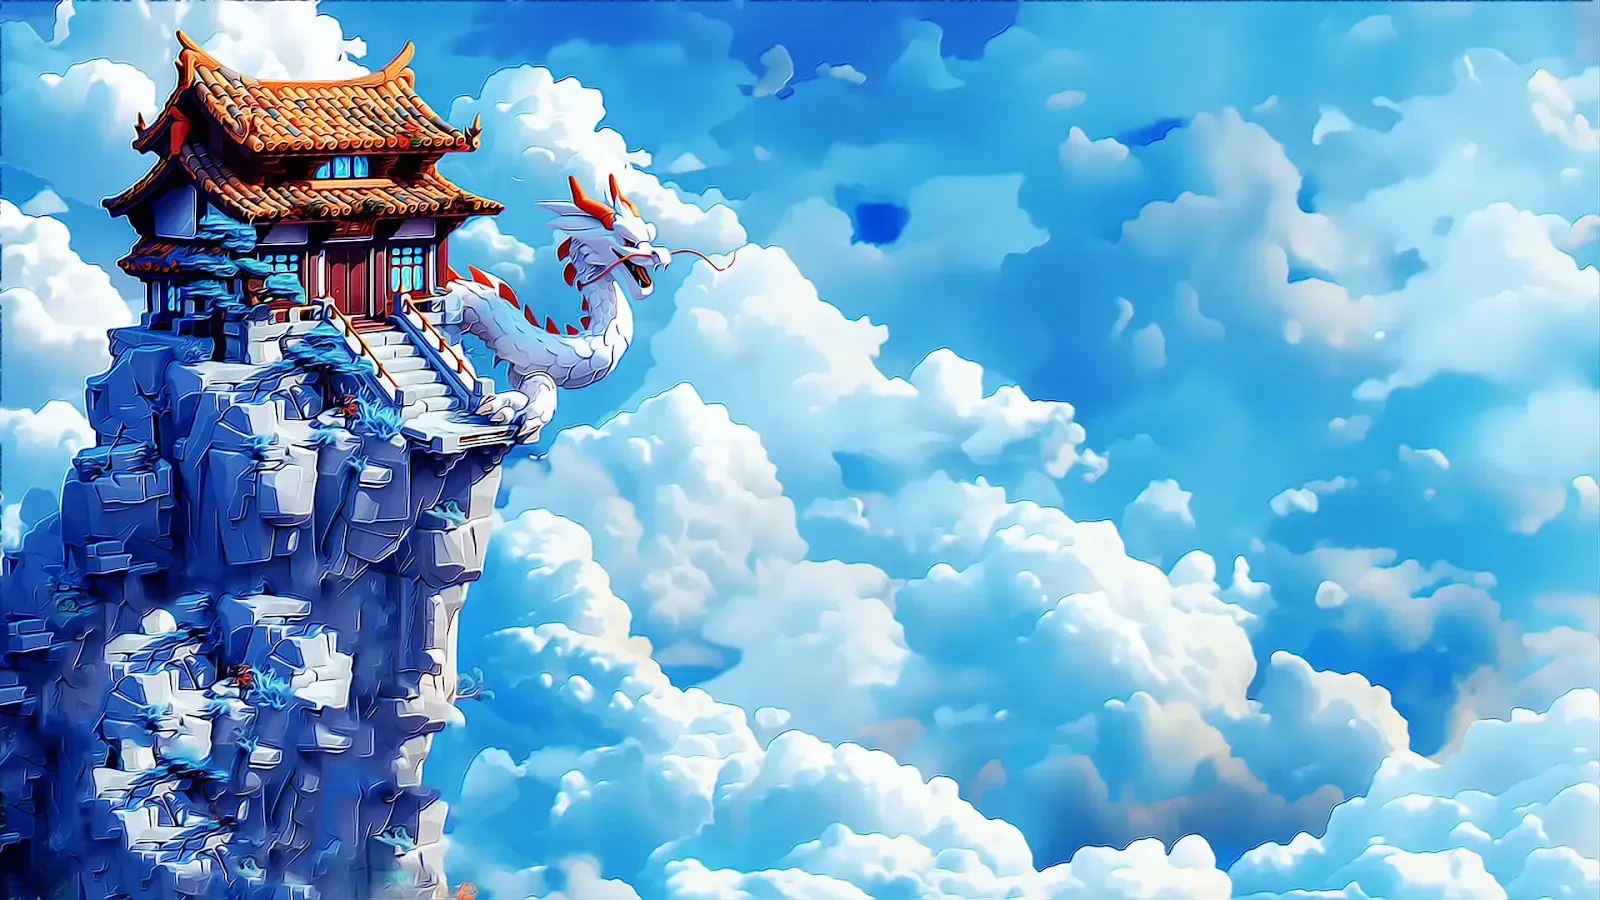 Mystical pagoda atop a craggy peak with a traditional dragon statue winding around it, set against a backdrop of fluffy clouds in a vivid blue sky.